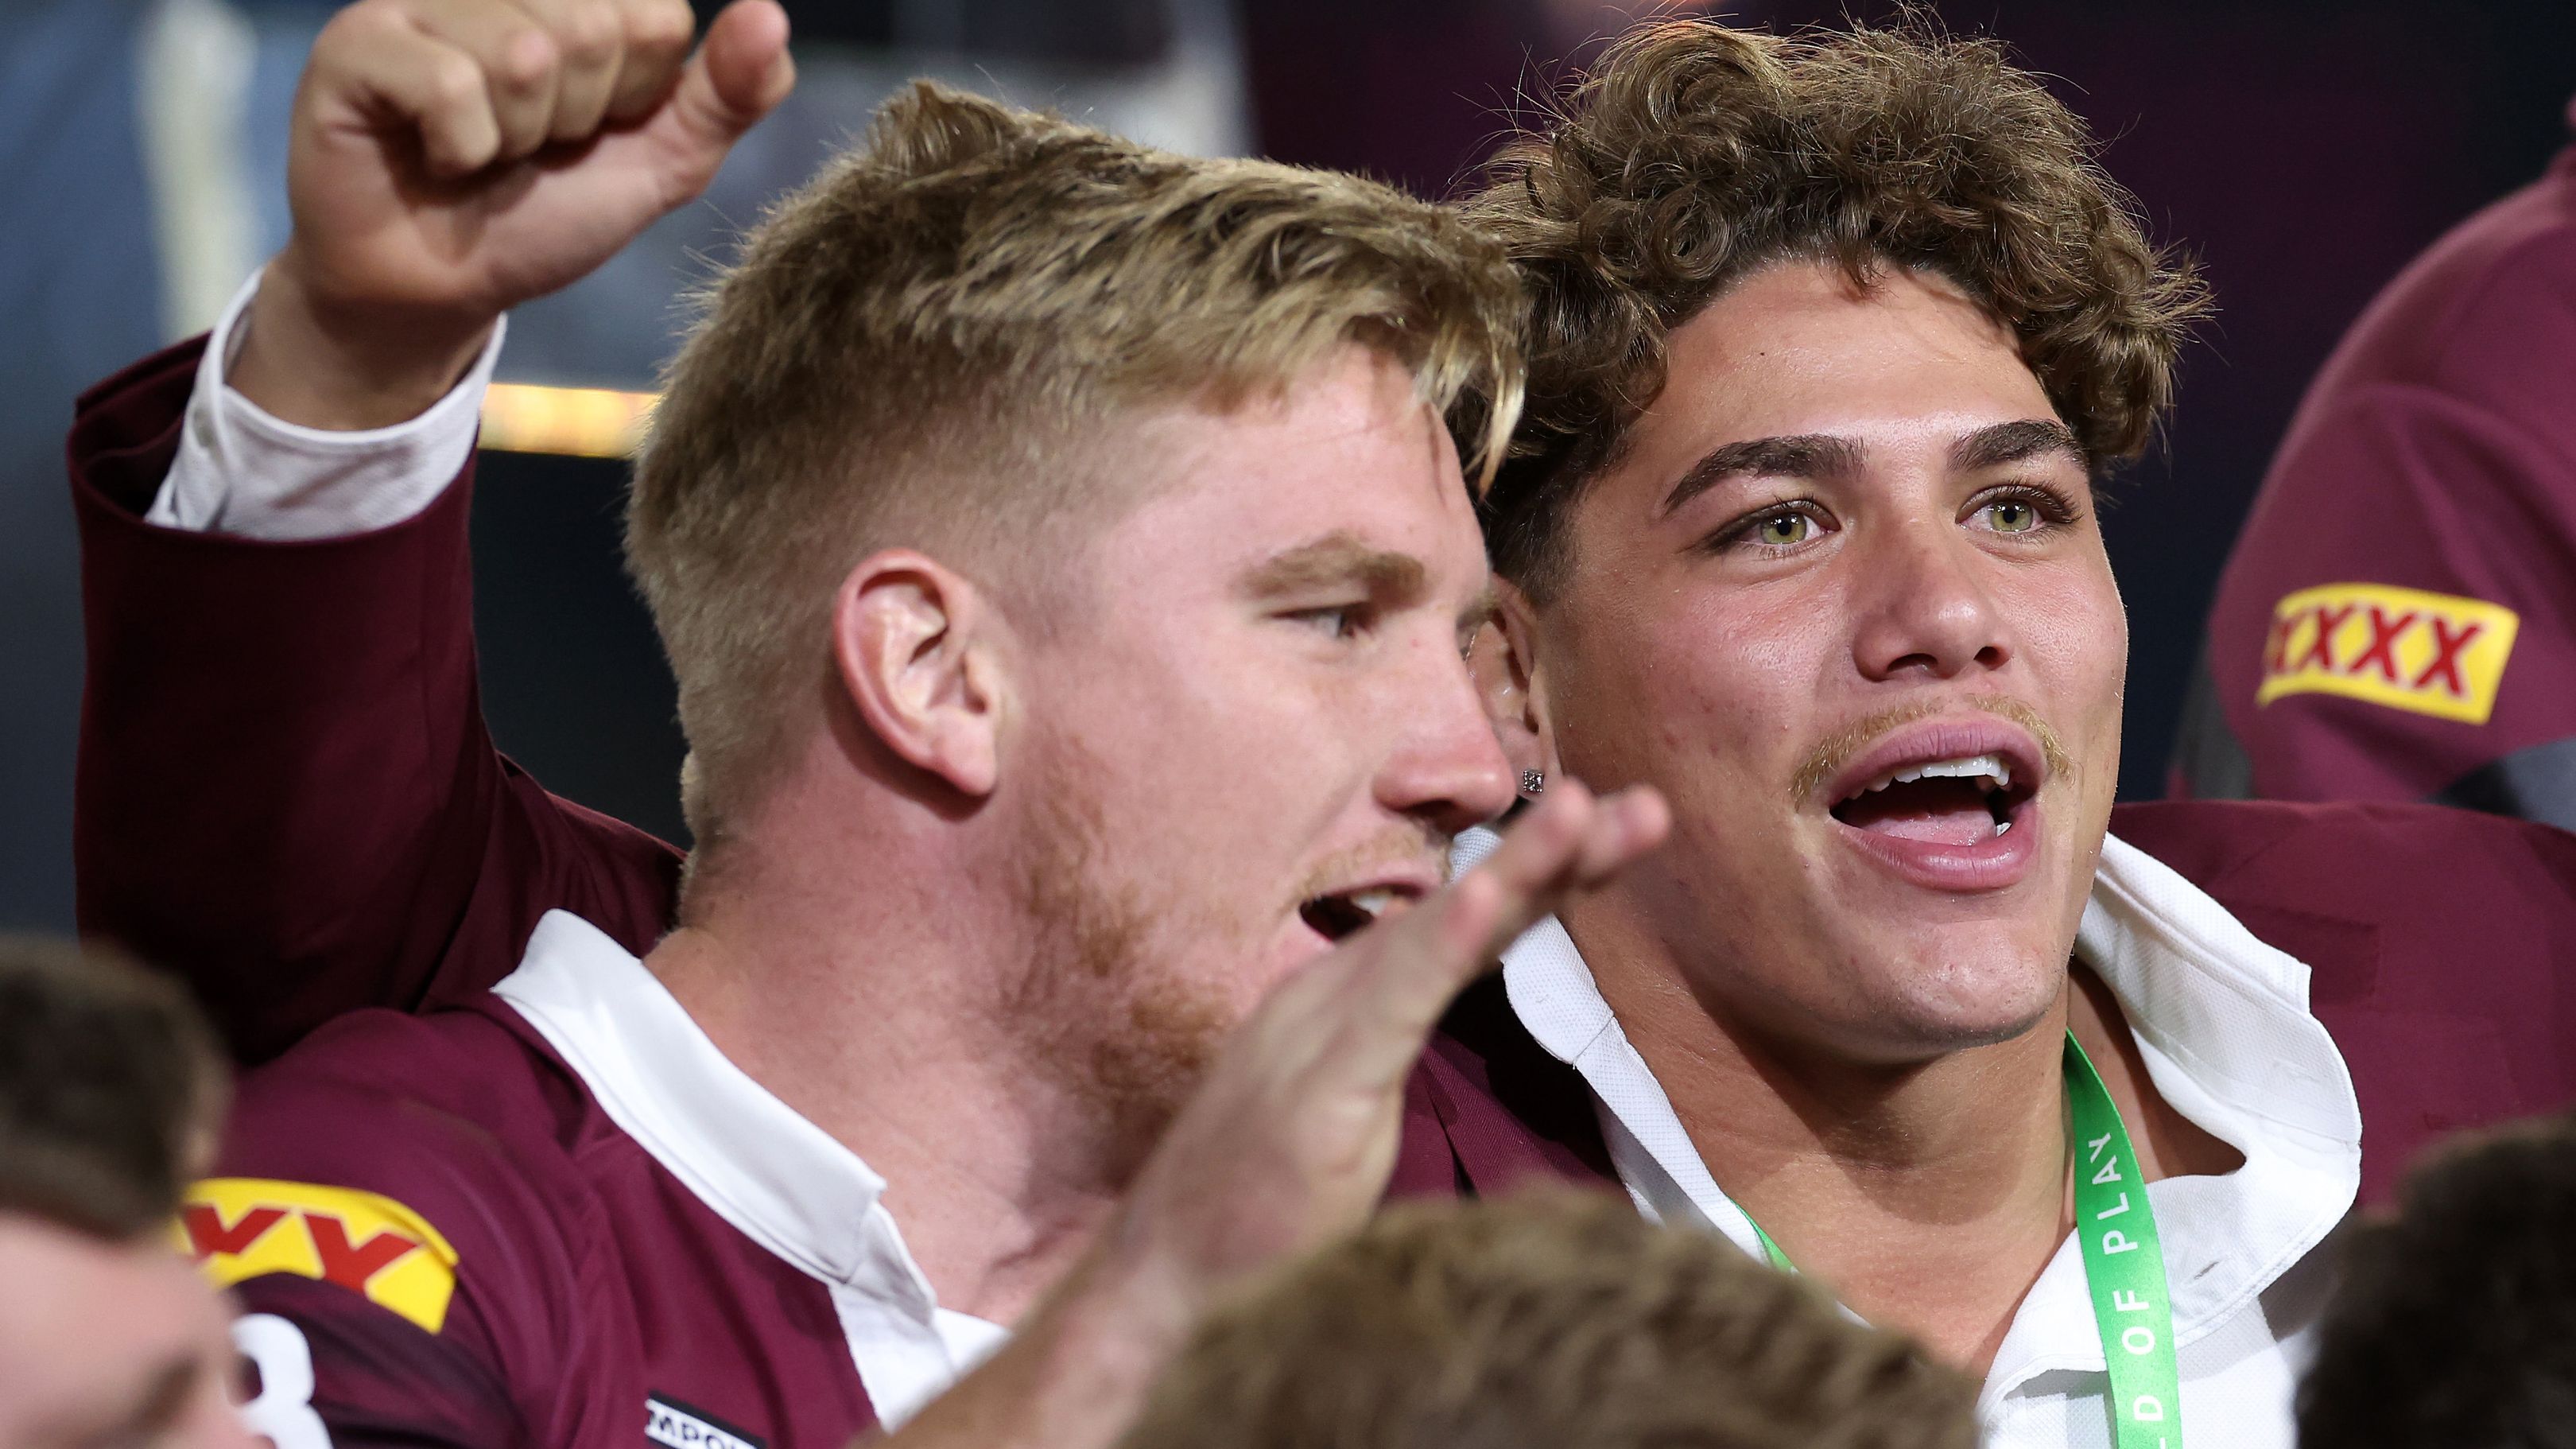 Reece Walsh of the Maroons celebrates with team mates after winning the series 2-1 after game three of the State of Origin series.